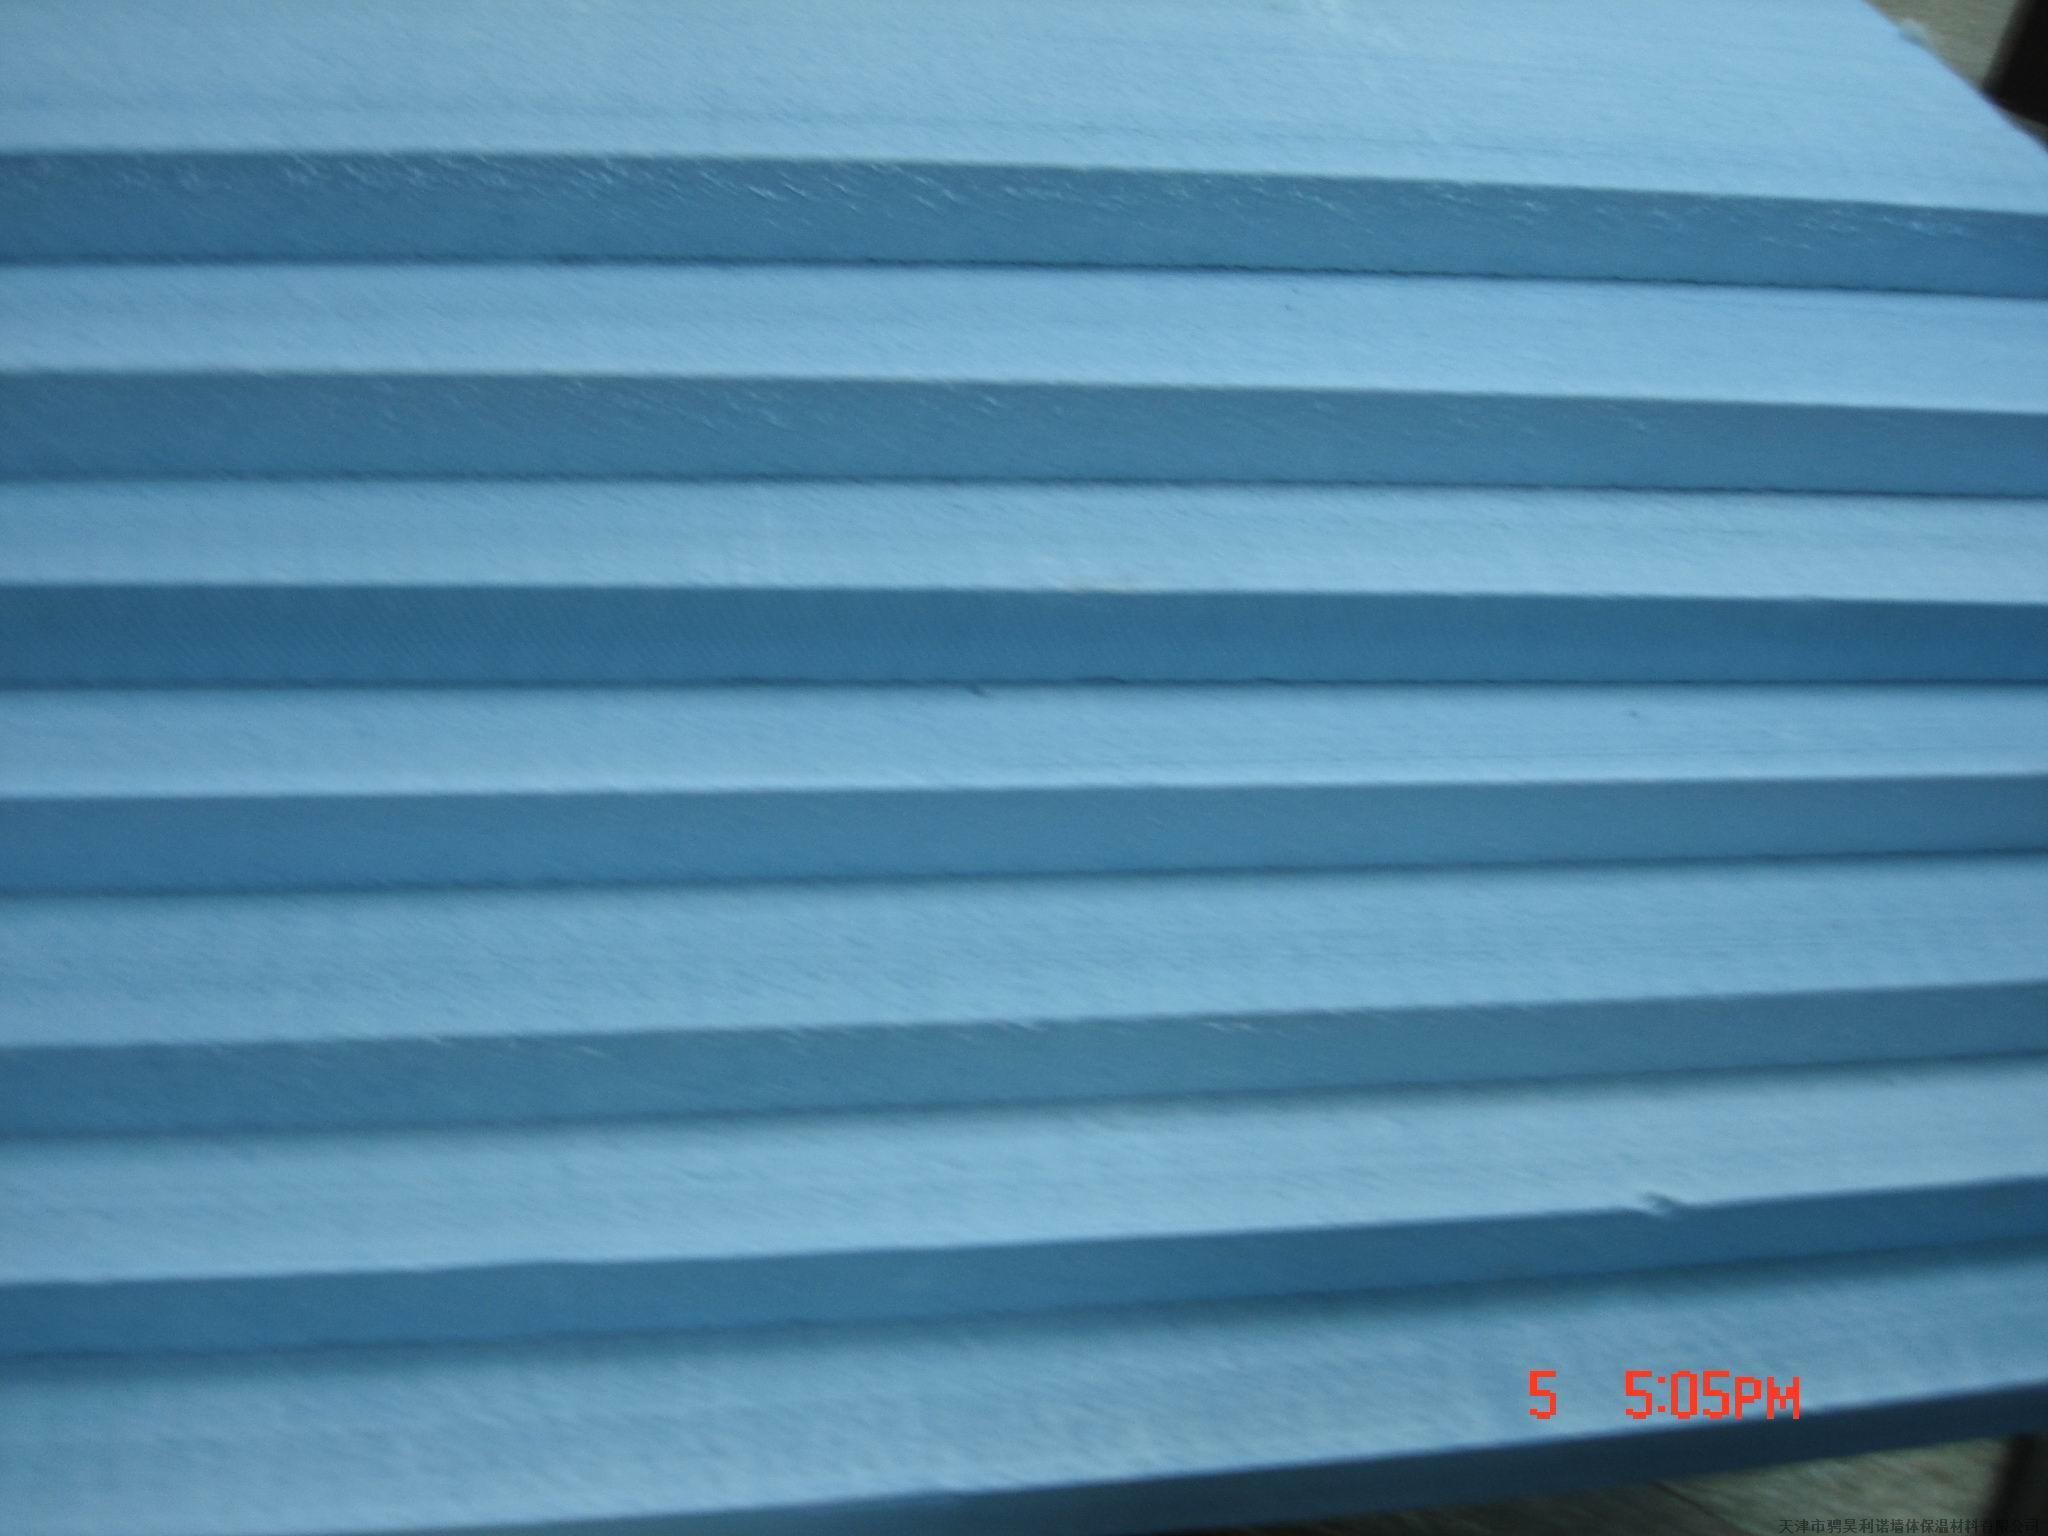 Roof Insulation Xps Board, Extruded Polystyrene Foam - Extruded Polystyrene Foam Board Roof Insulation - HD Wallpaper 